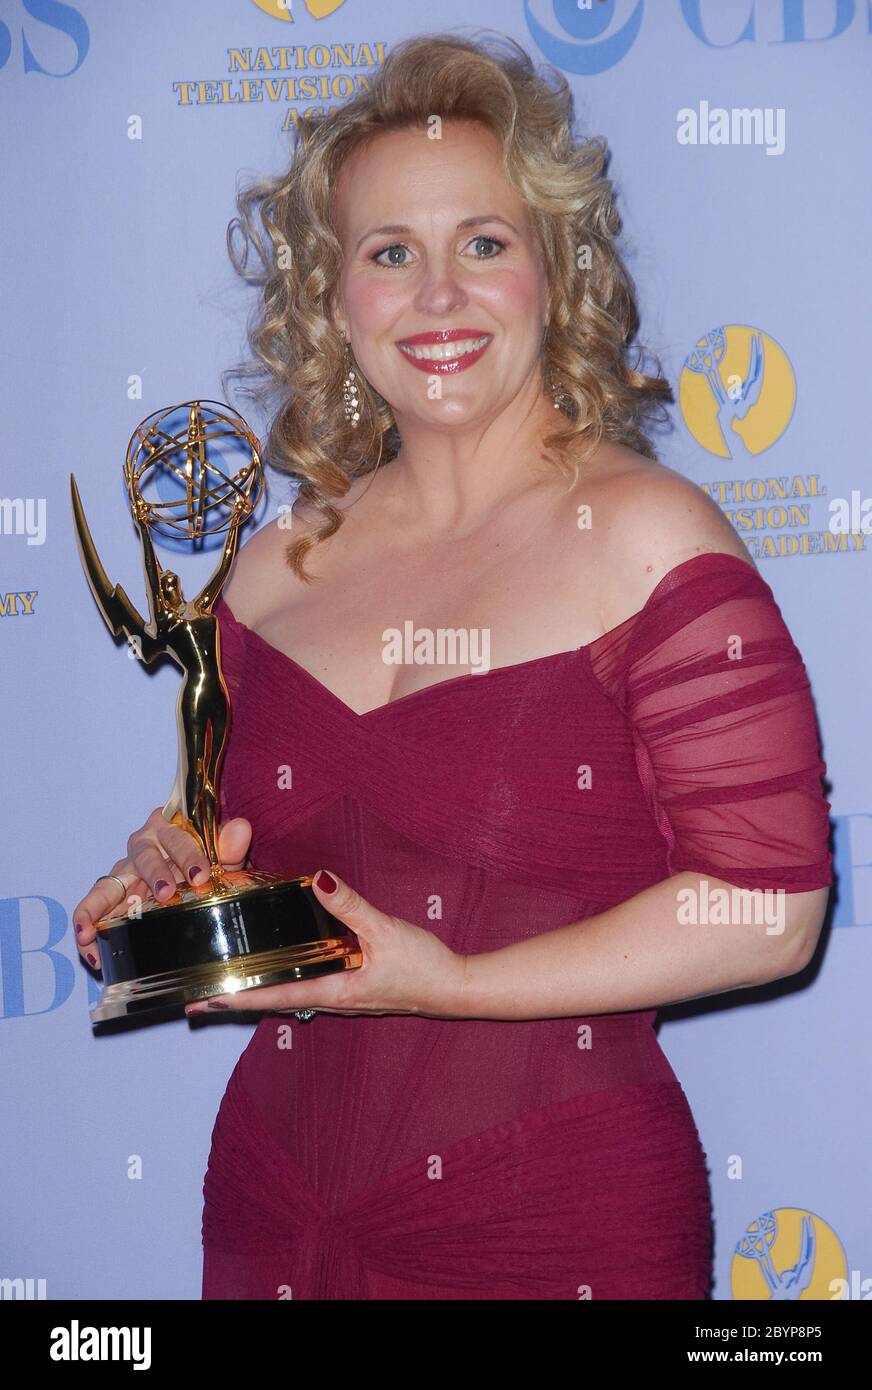 Genie Francis at the 34th Annual Daytime Emmy Awards - Press Room held at the Kodak Theatre in Hollywood, CA. The event took place on Friday, June 15, 2007. Photo by: SBM / PictureLux - File Reference # 34006-5932SBMPLX Stock Photo